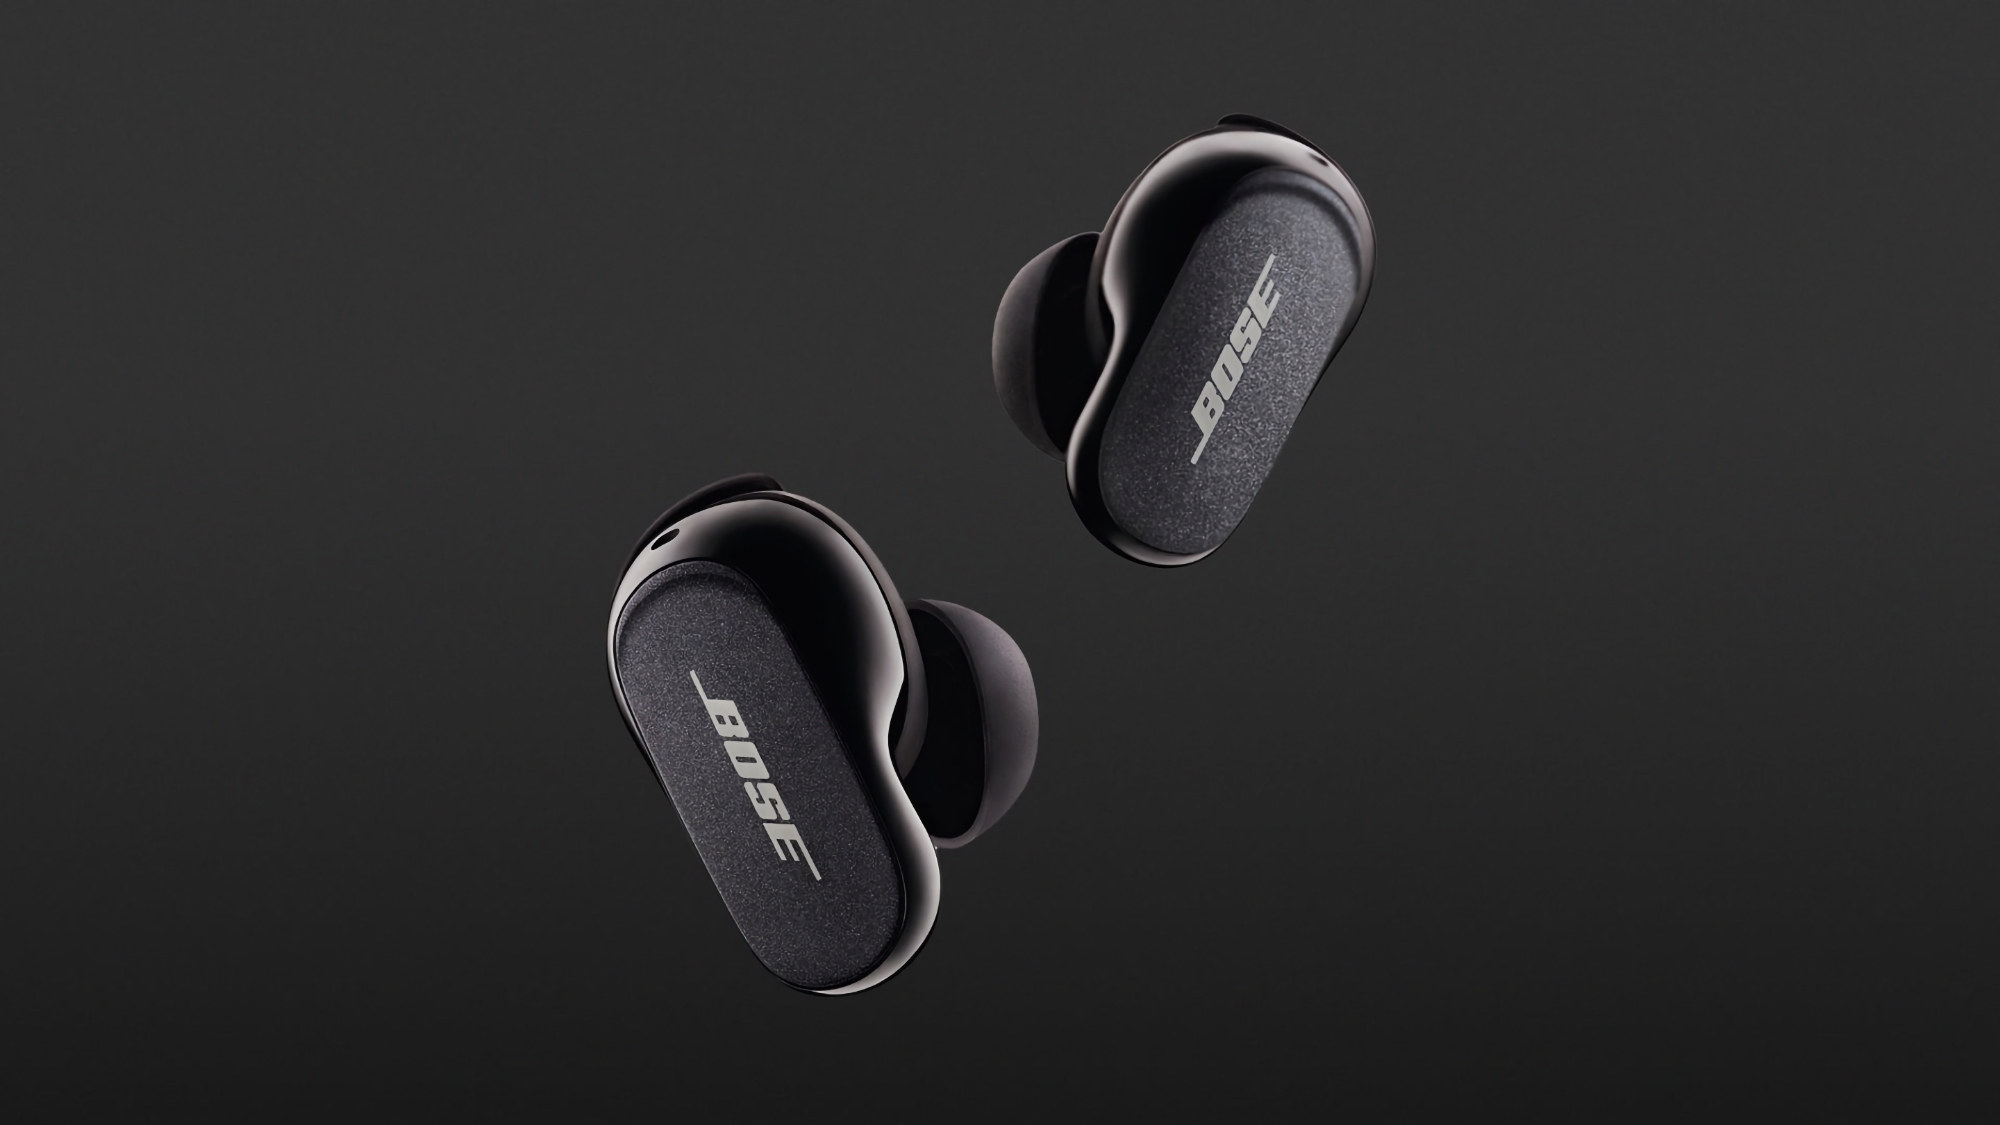 AirPods Pro competitor: new TWS earphones Bose QuietComfort Earbuds II with ANC and up to 24 hours battery life sold at a discount on Amazon